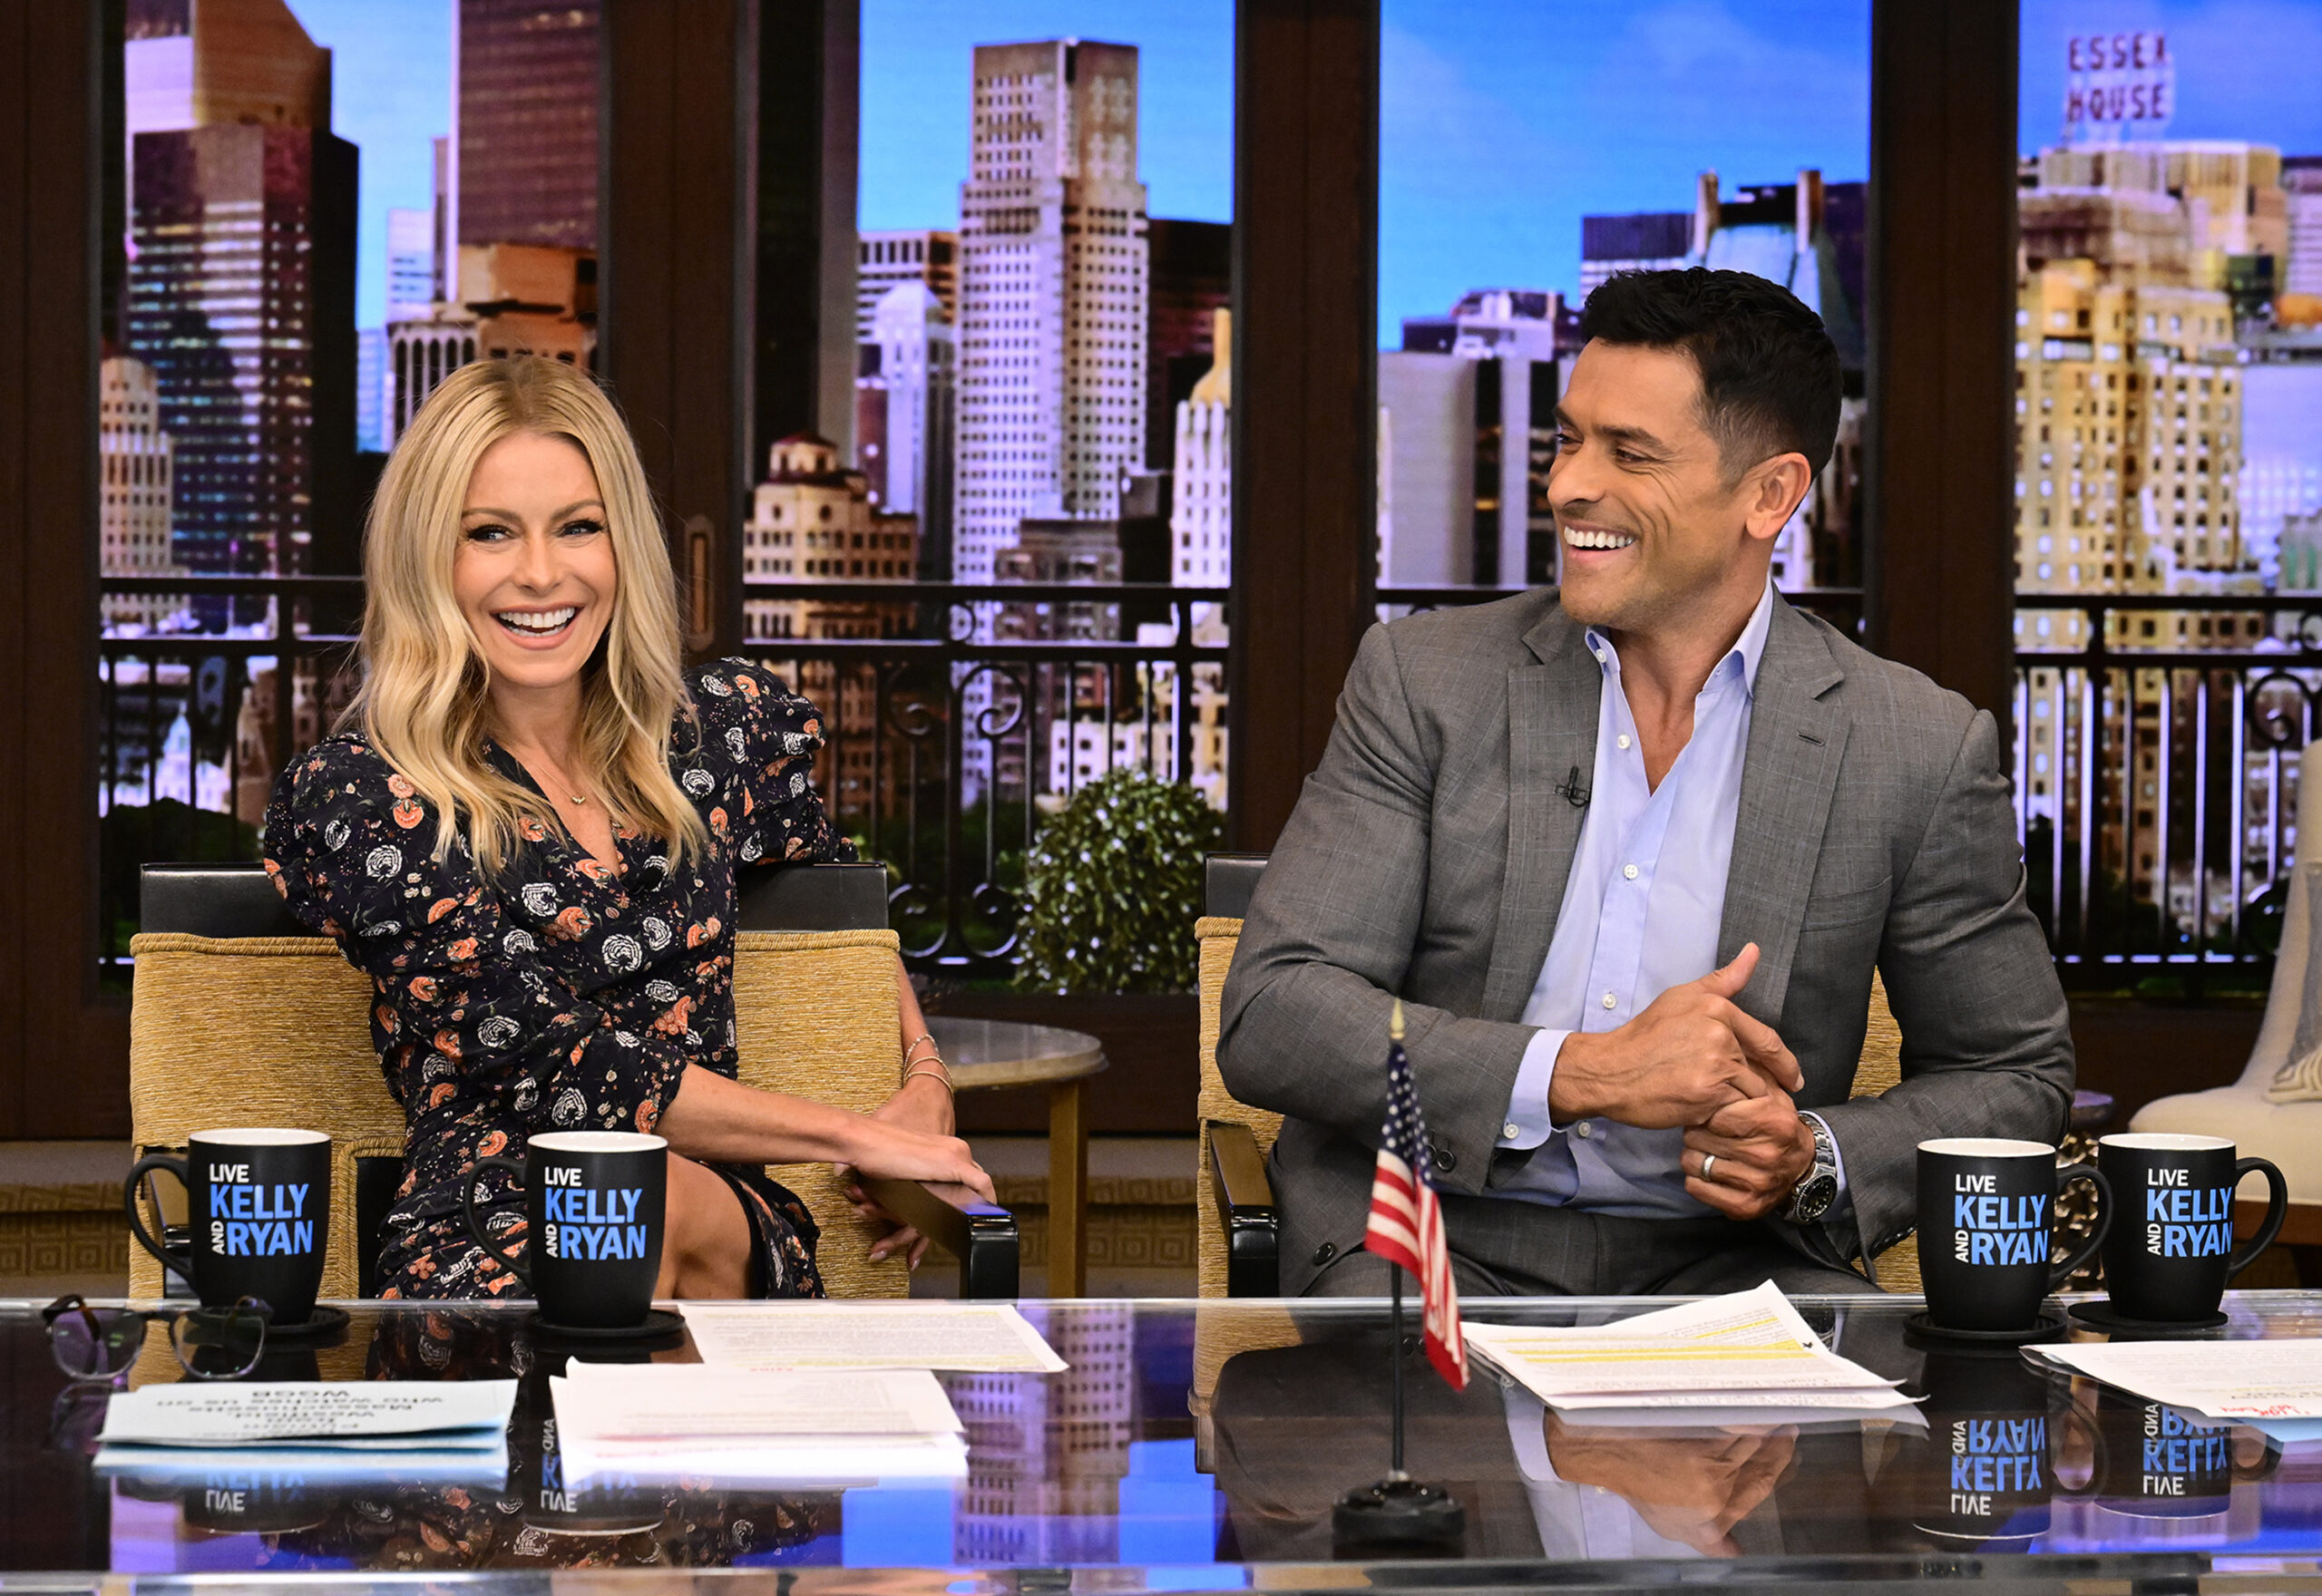 Where Will Ryan Seacrest Go After Leaving Live With Kelly And Ryan?